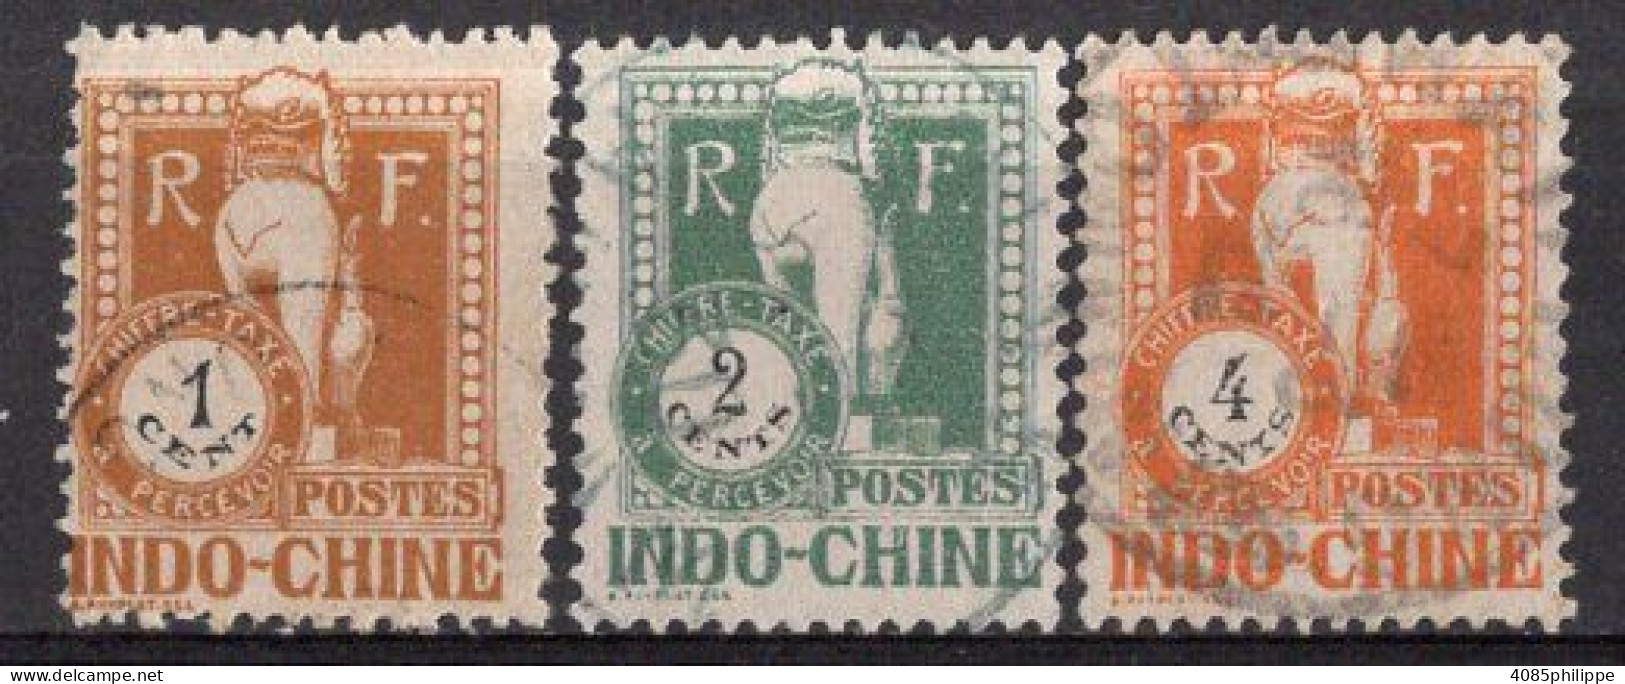 INDOCHINE Timbres-Taxe N°33, 34 & 36 Oblitérés TB Cote : 1€75 - Postage Due